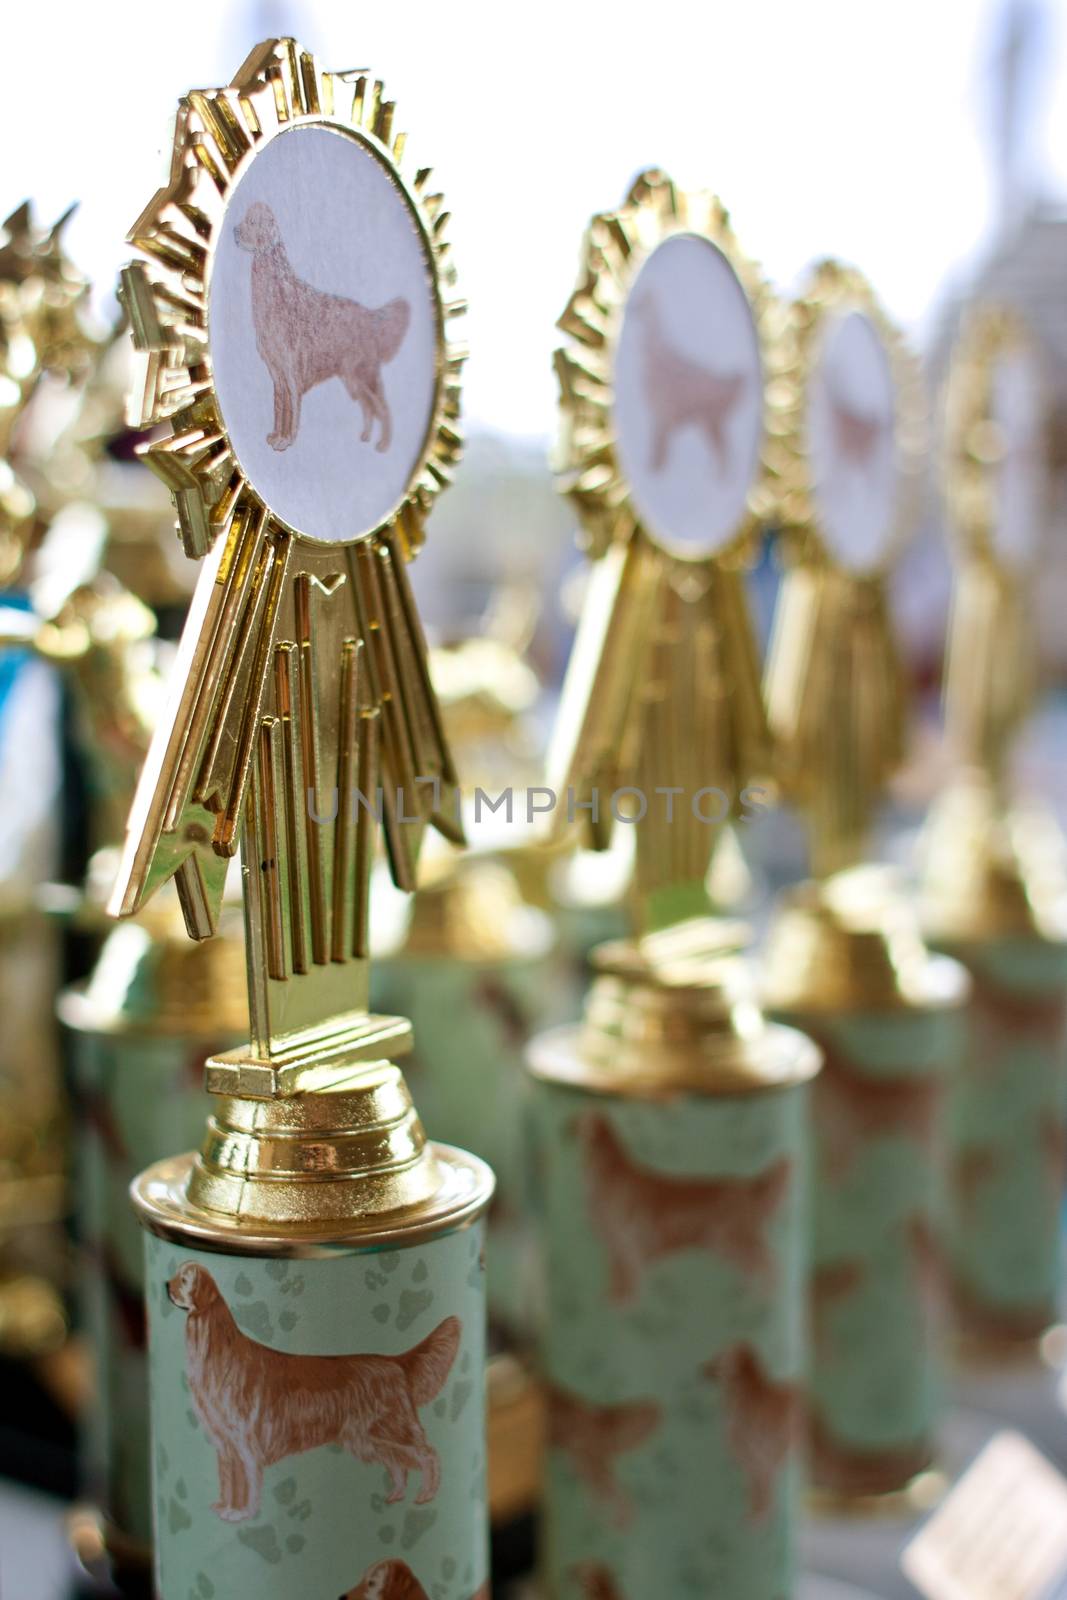 Canine Themed Trophies Sit On Display At Dog Festival by BluIz60